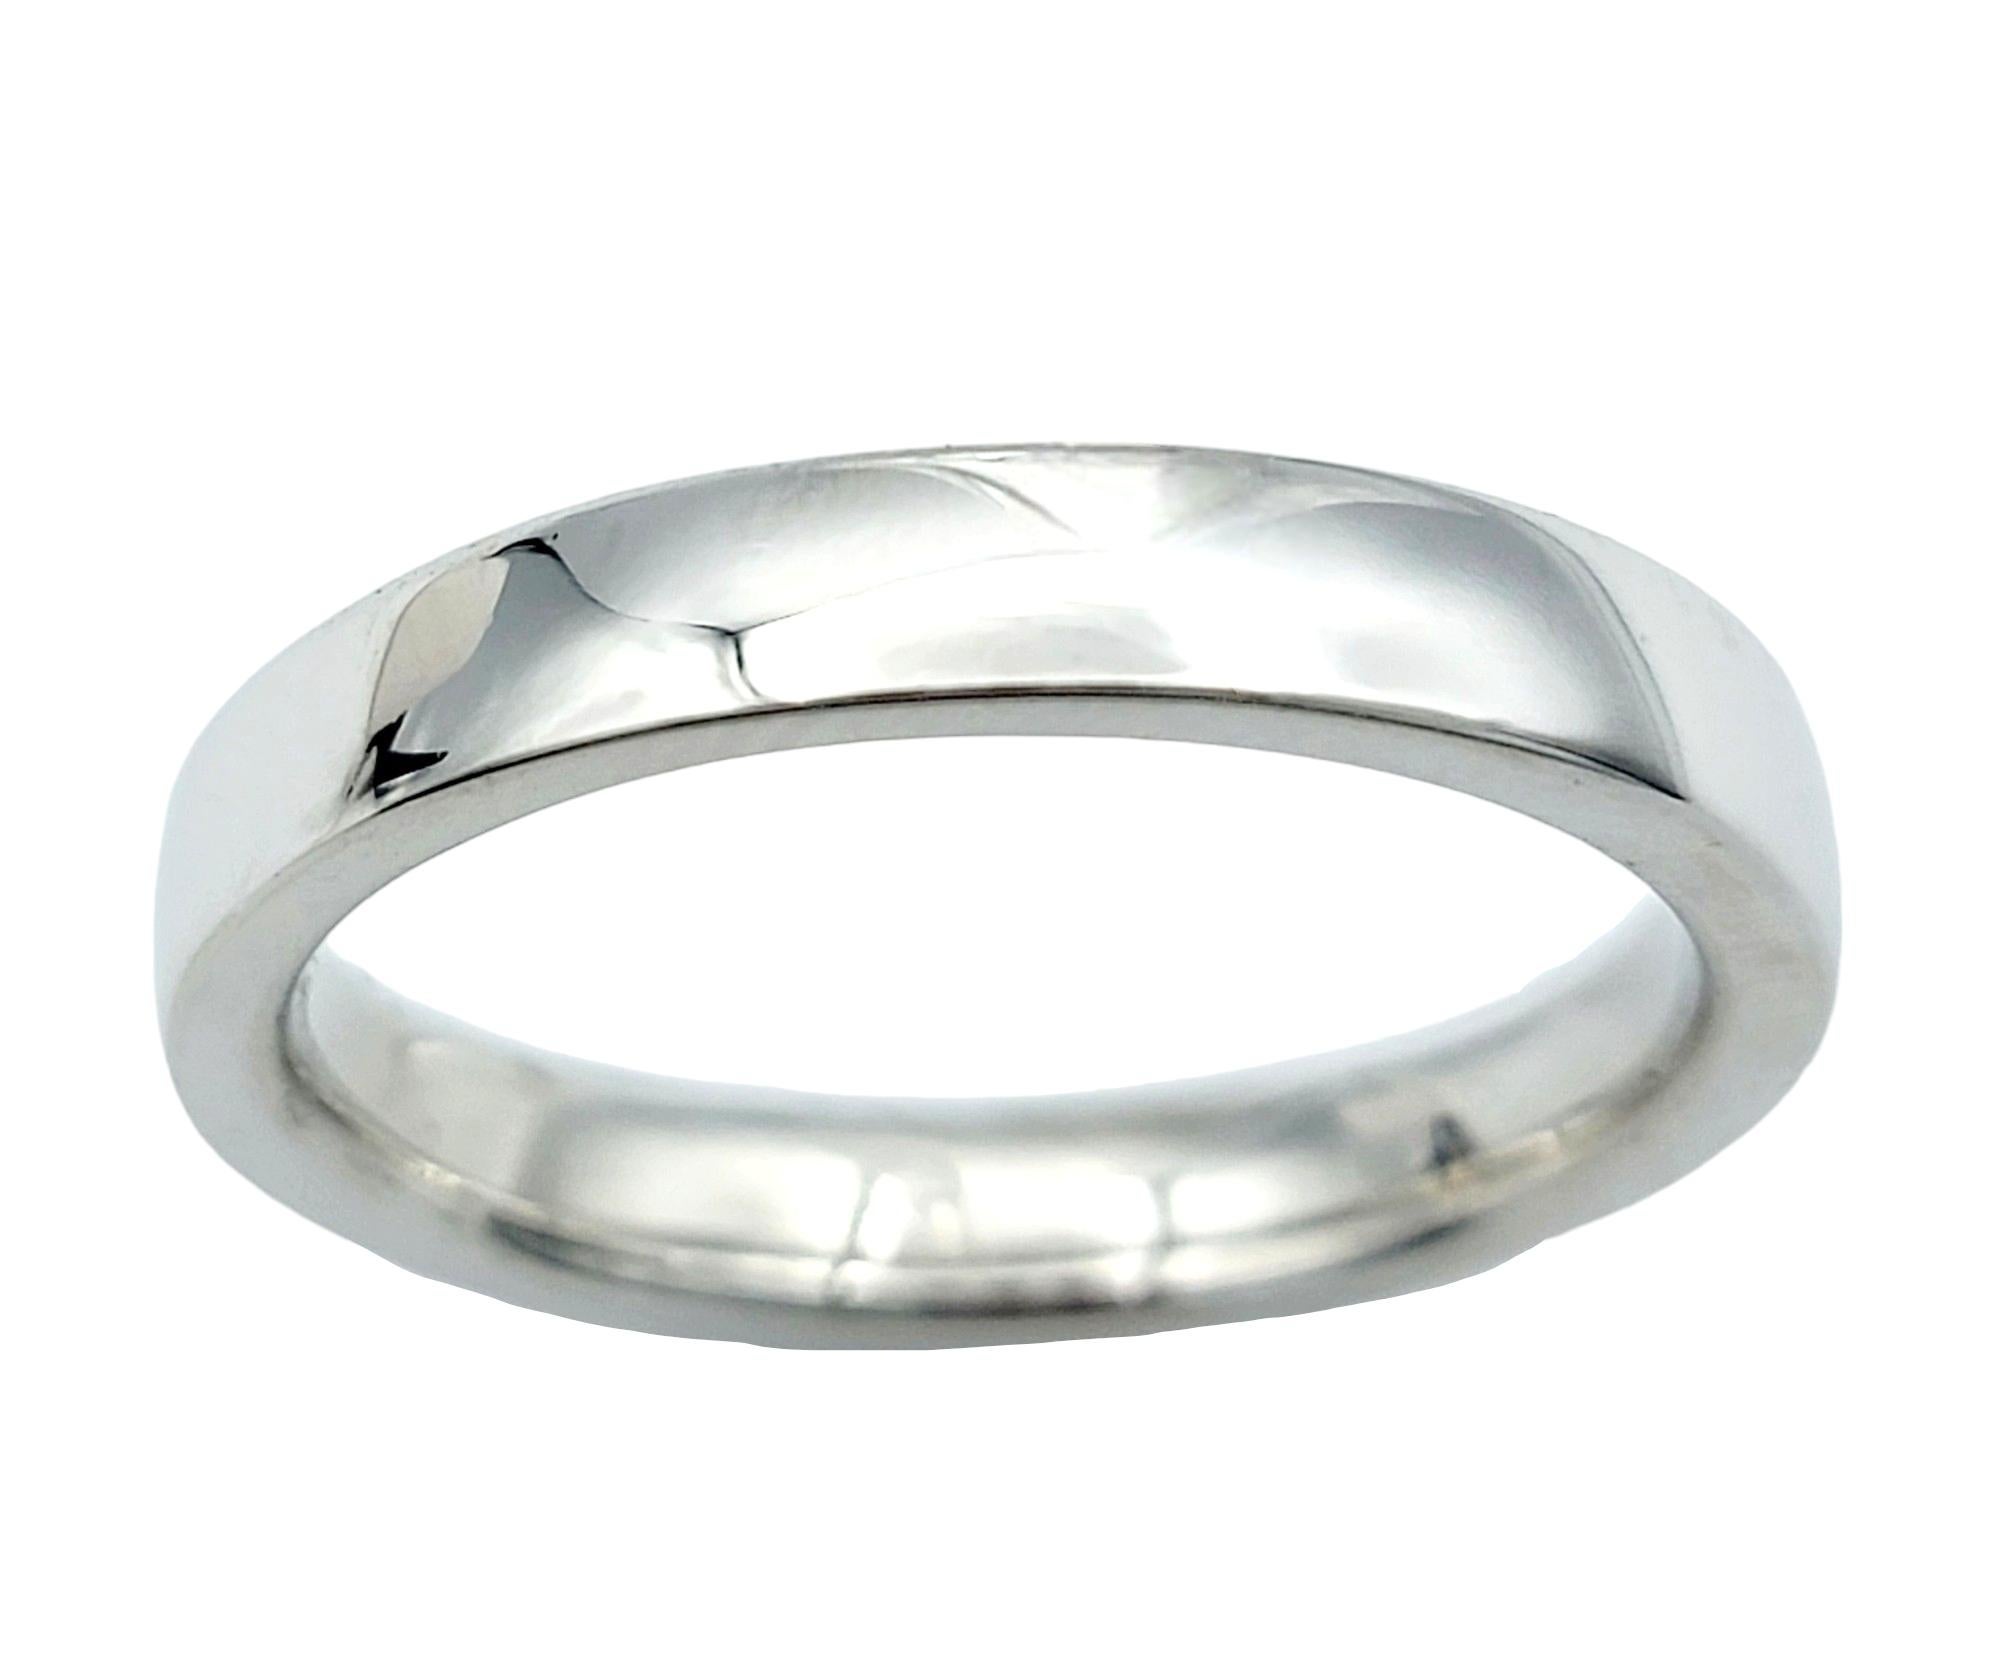 Ring Size: 11.25

This stunning Menē band ring, crafted in pure platinum, exemplifies understated elegance and sophistication. Meticulously crafted with the finest quality platinum, this ring boasts a sleek and timeless design that is perfect for